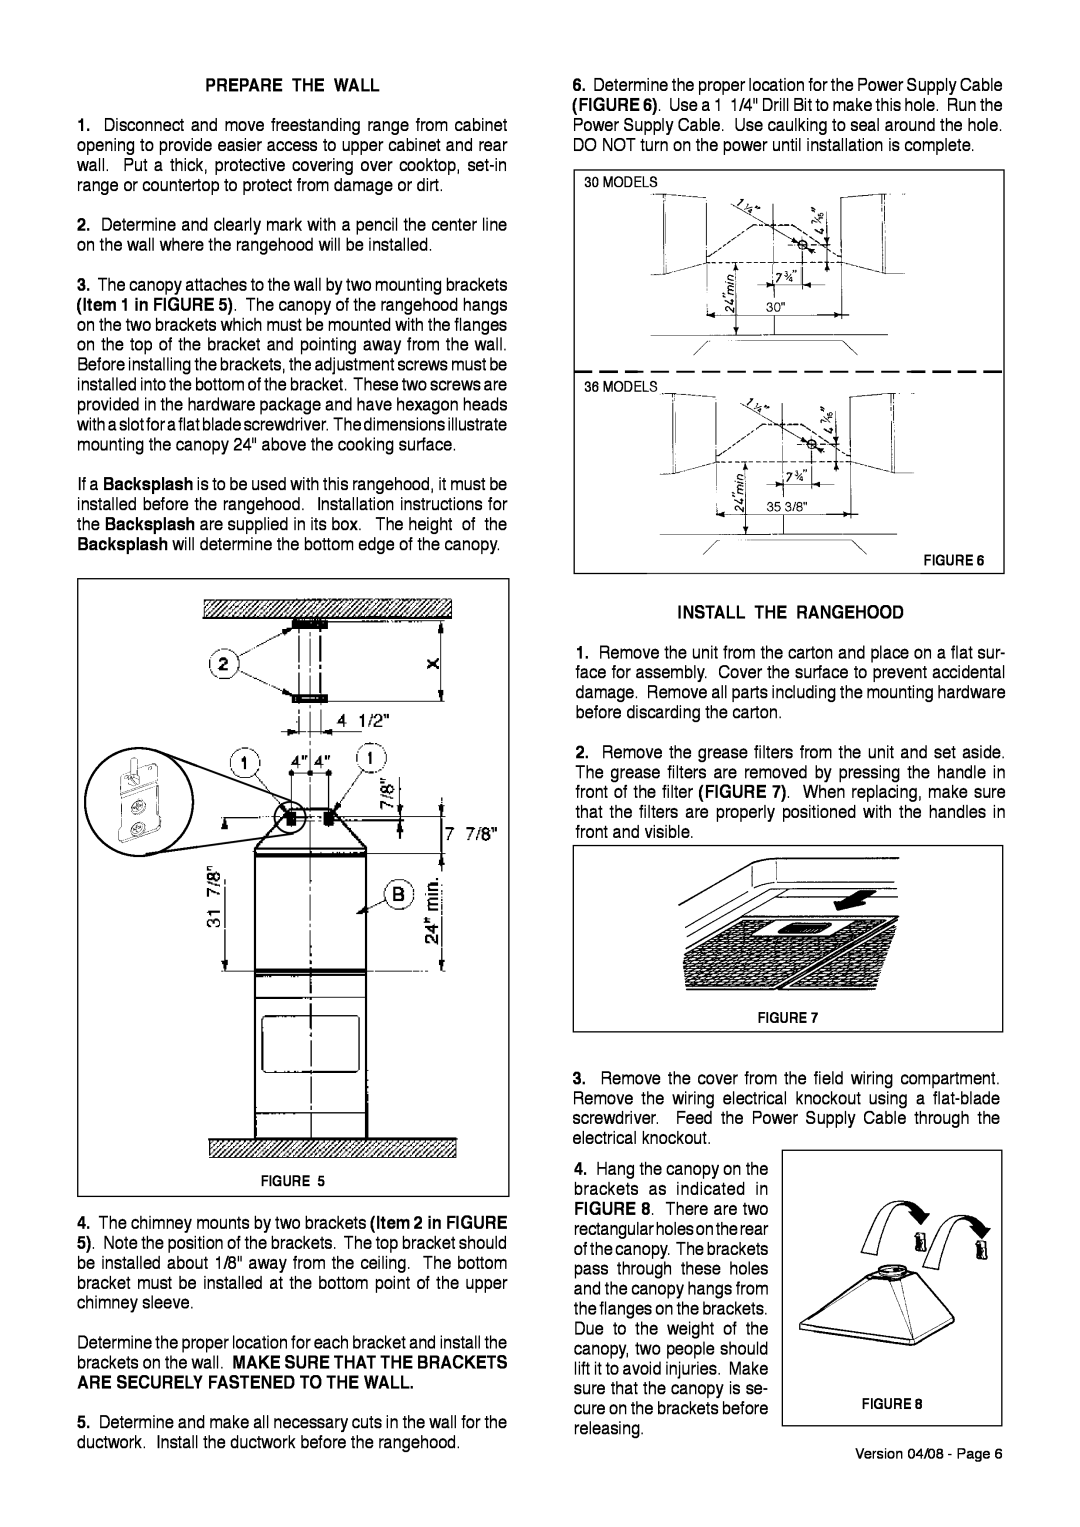 Faber 36 installation instructions Prepare The Wall, Are Securely Fastened To The Wall 